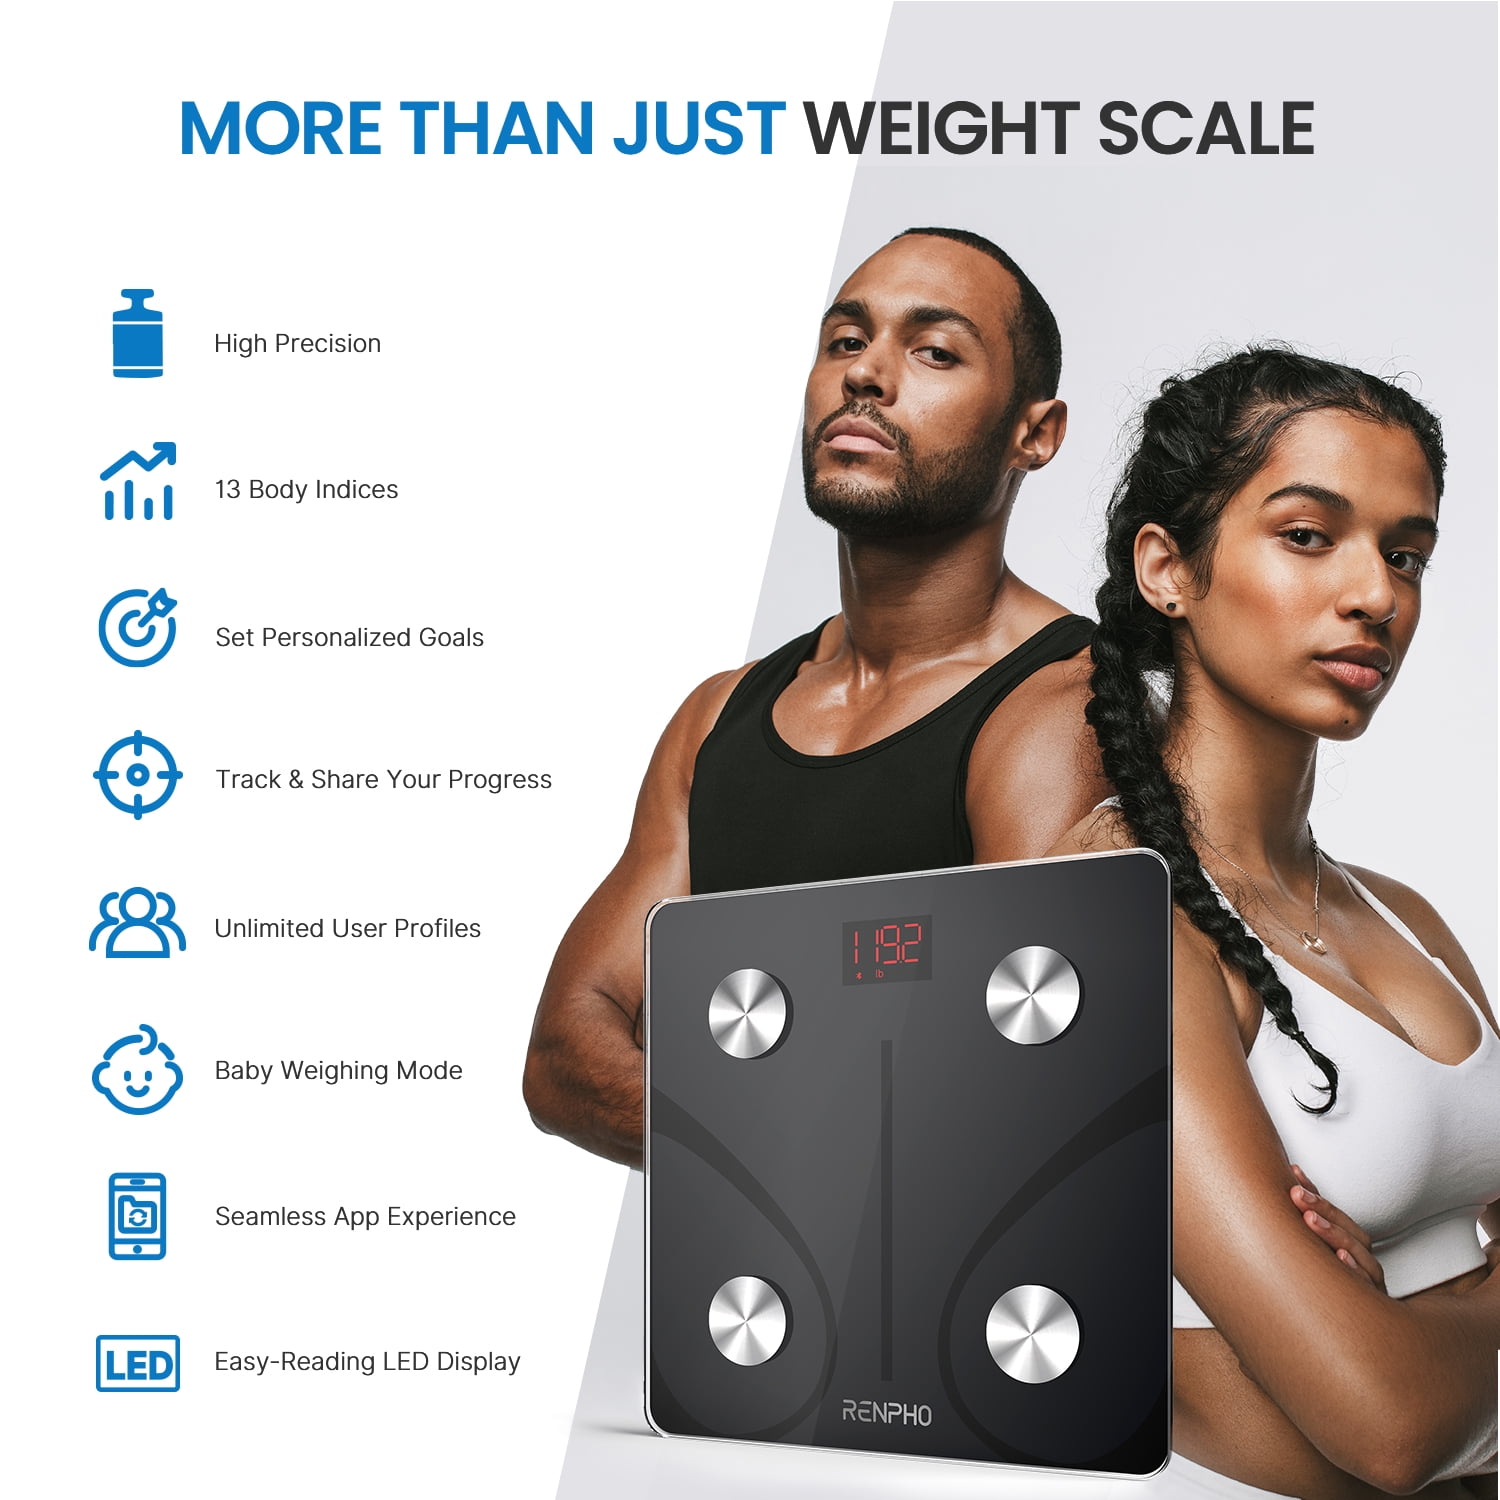 RENPHO High Accuracy Bluetooth Smart Body Weight Scale, FSA HSA Eligible, 396 lbs, Black, Size: 10.2 x 10.2 x 0.8